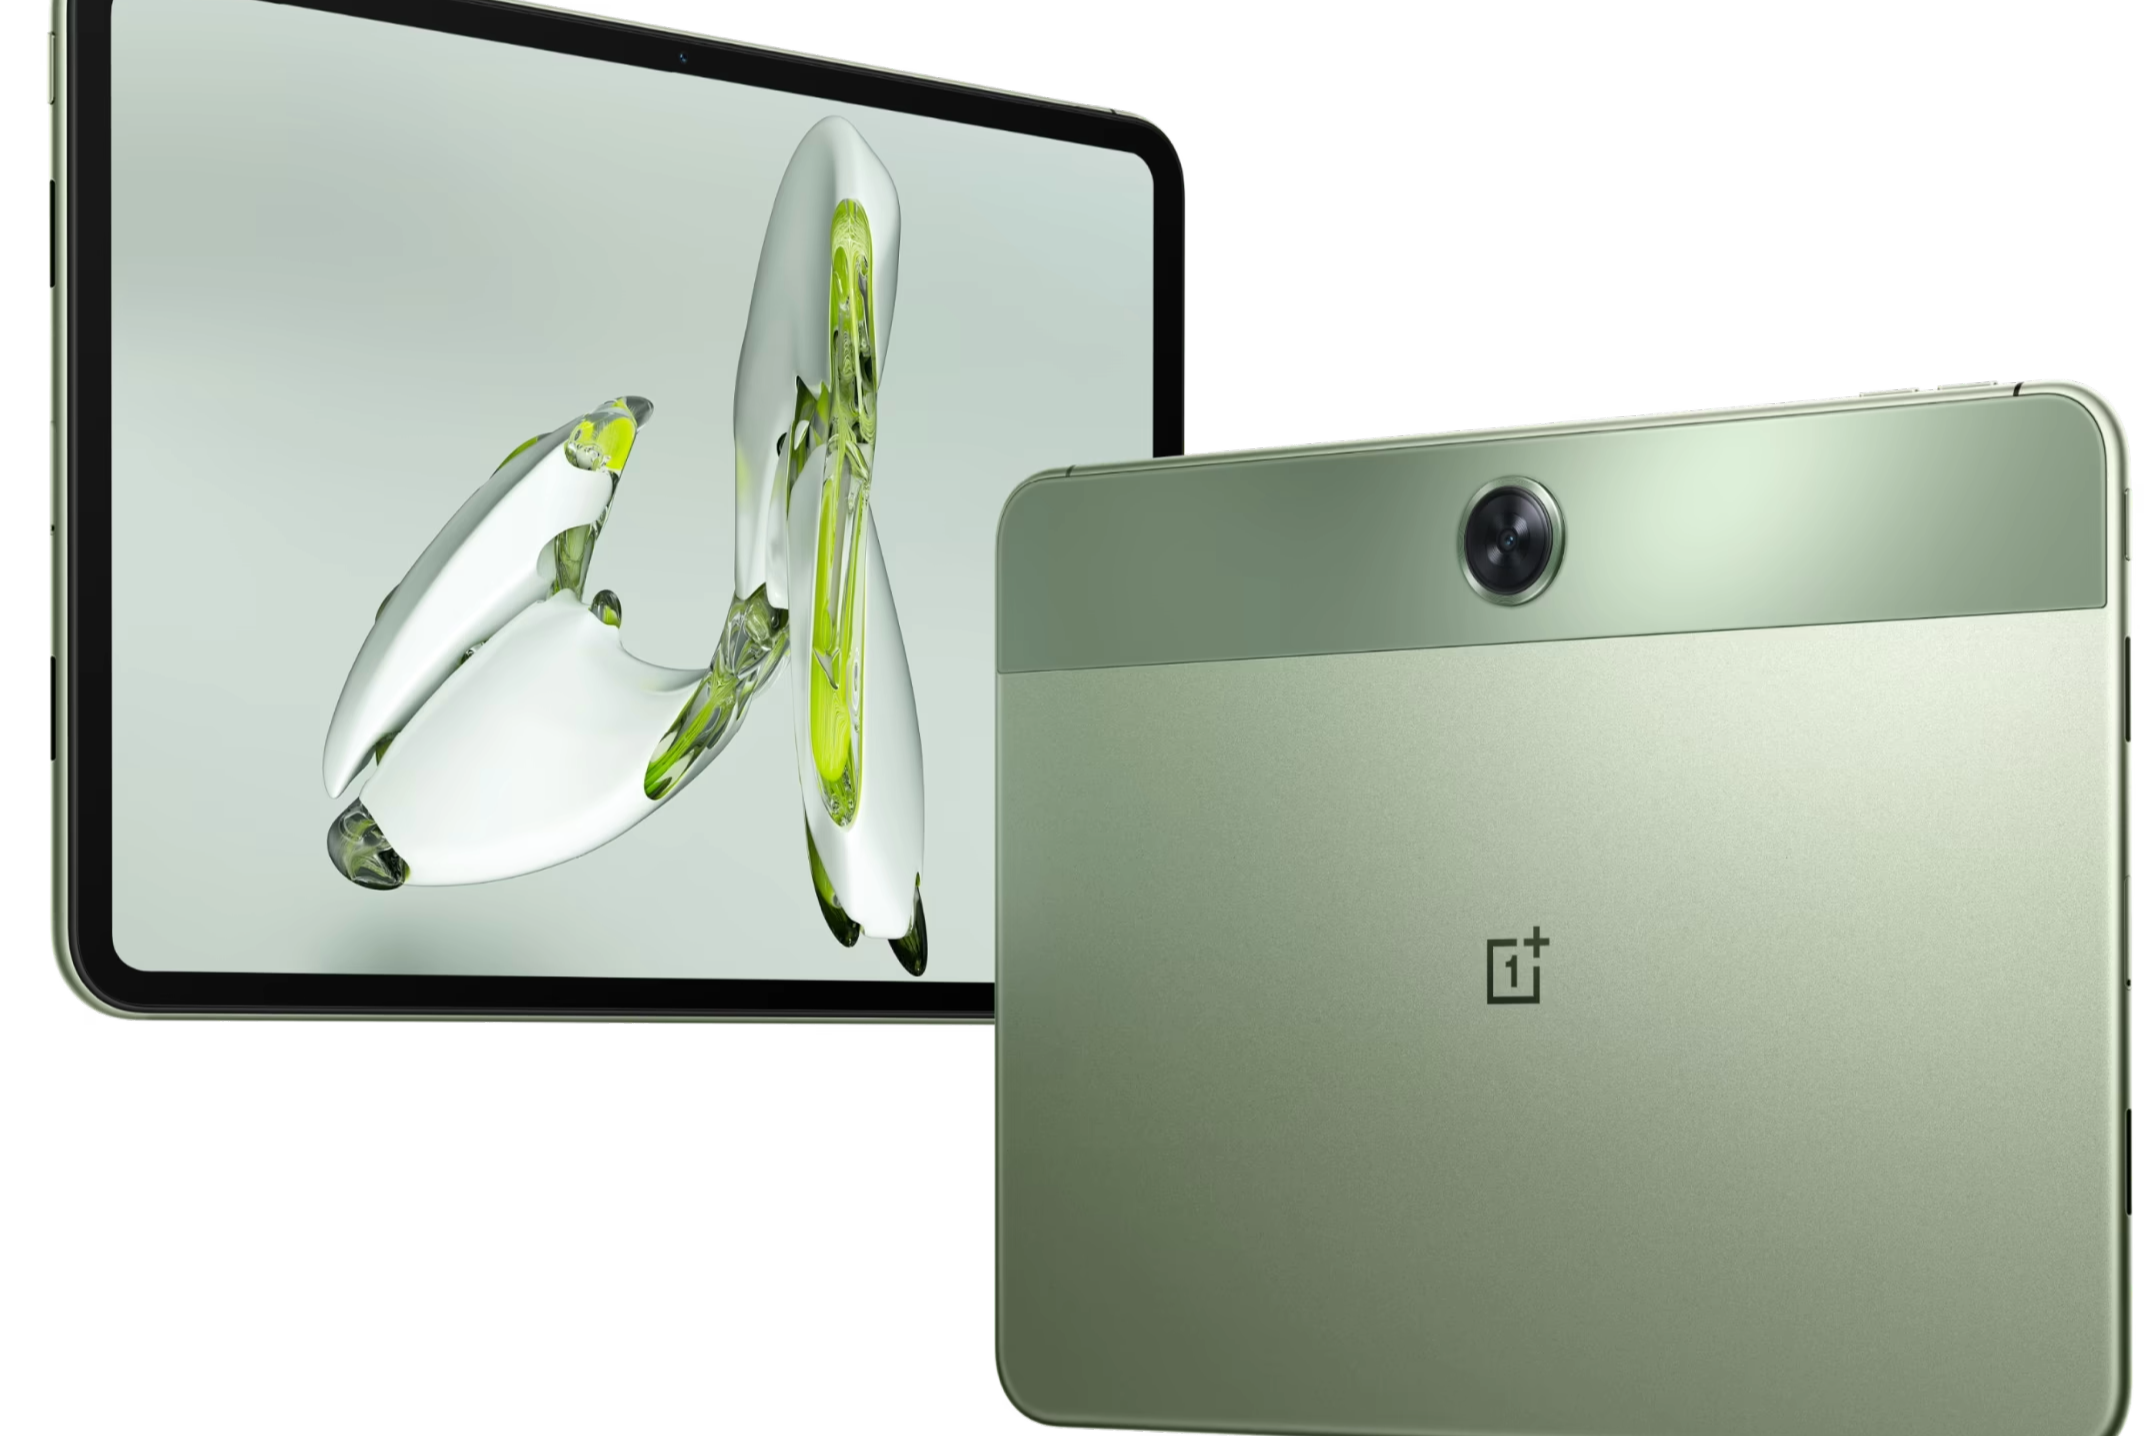 Image Credit–OnePlus - OnePlus launched its latest tablet, the OnePlus Pad Go is now official